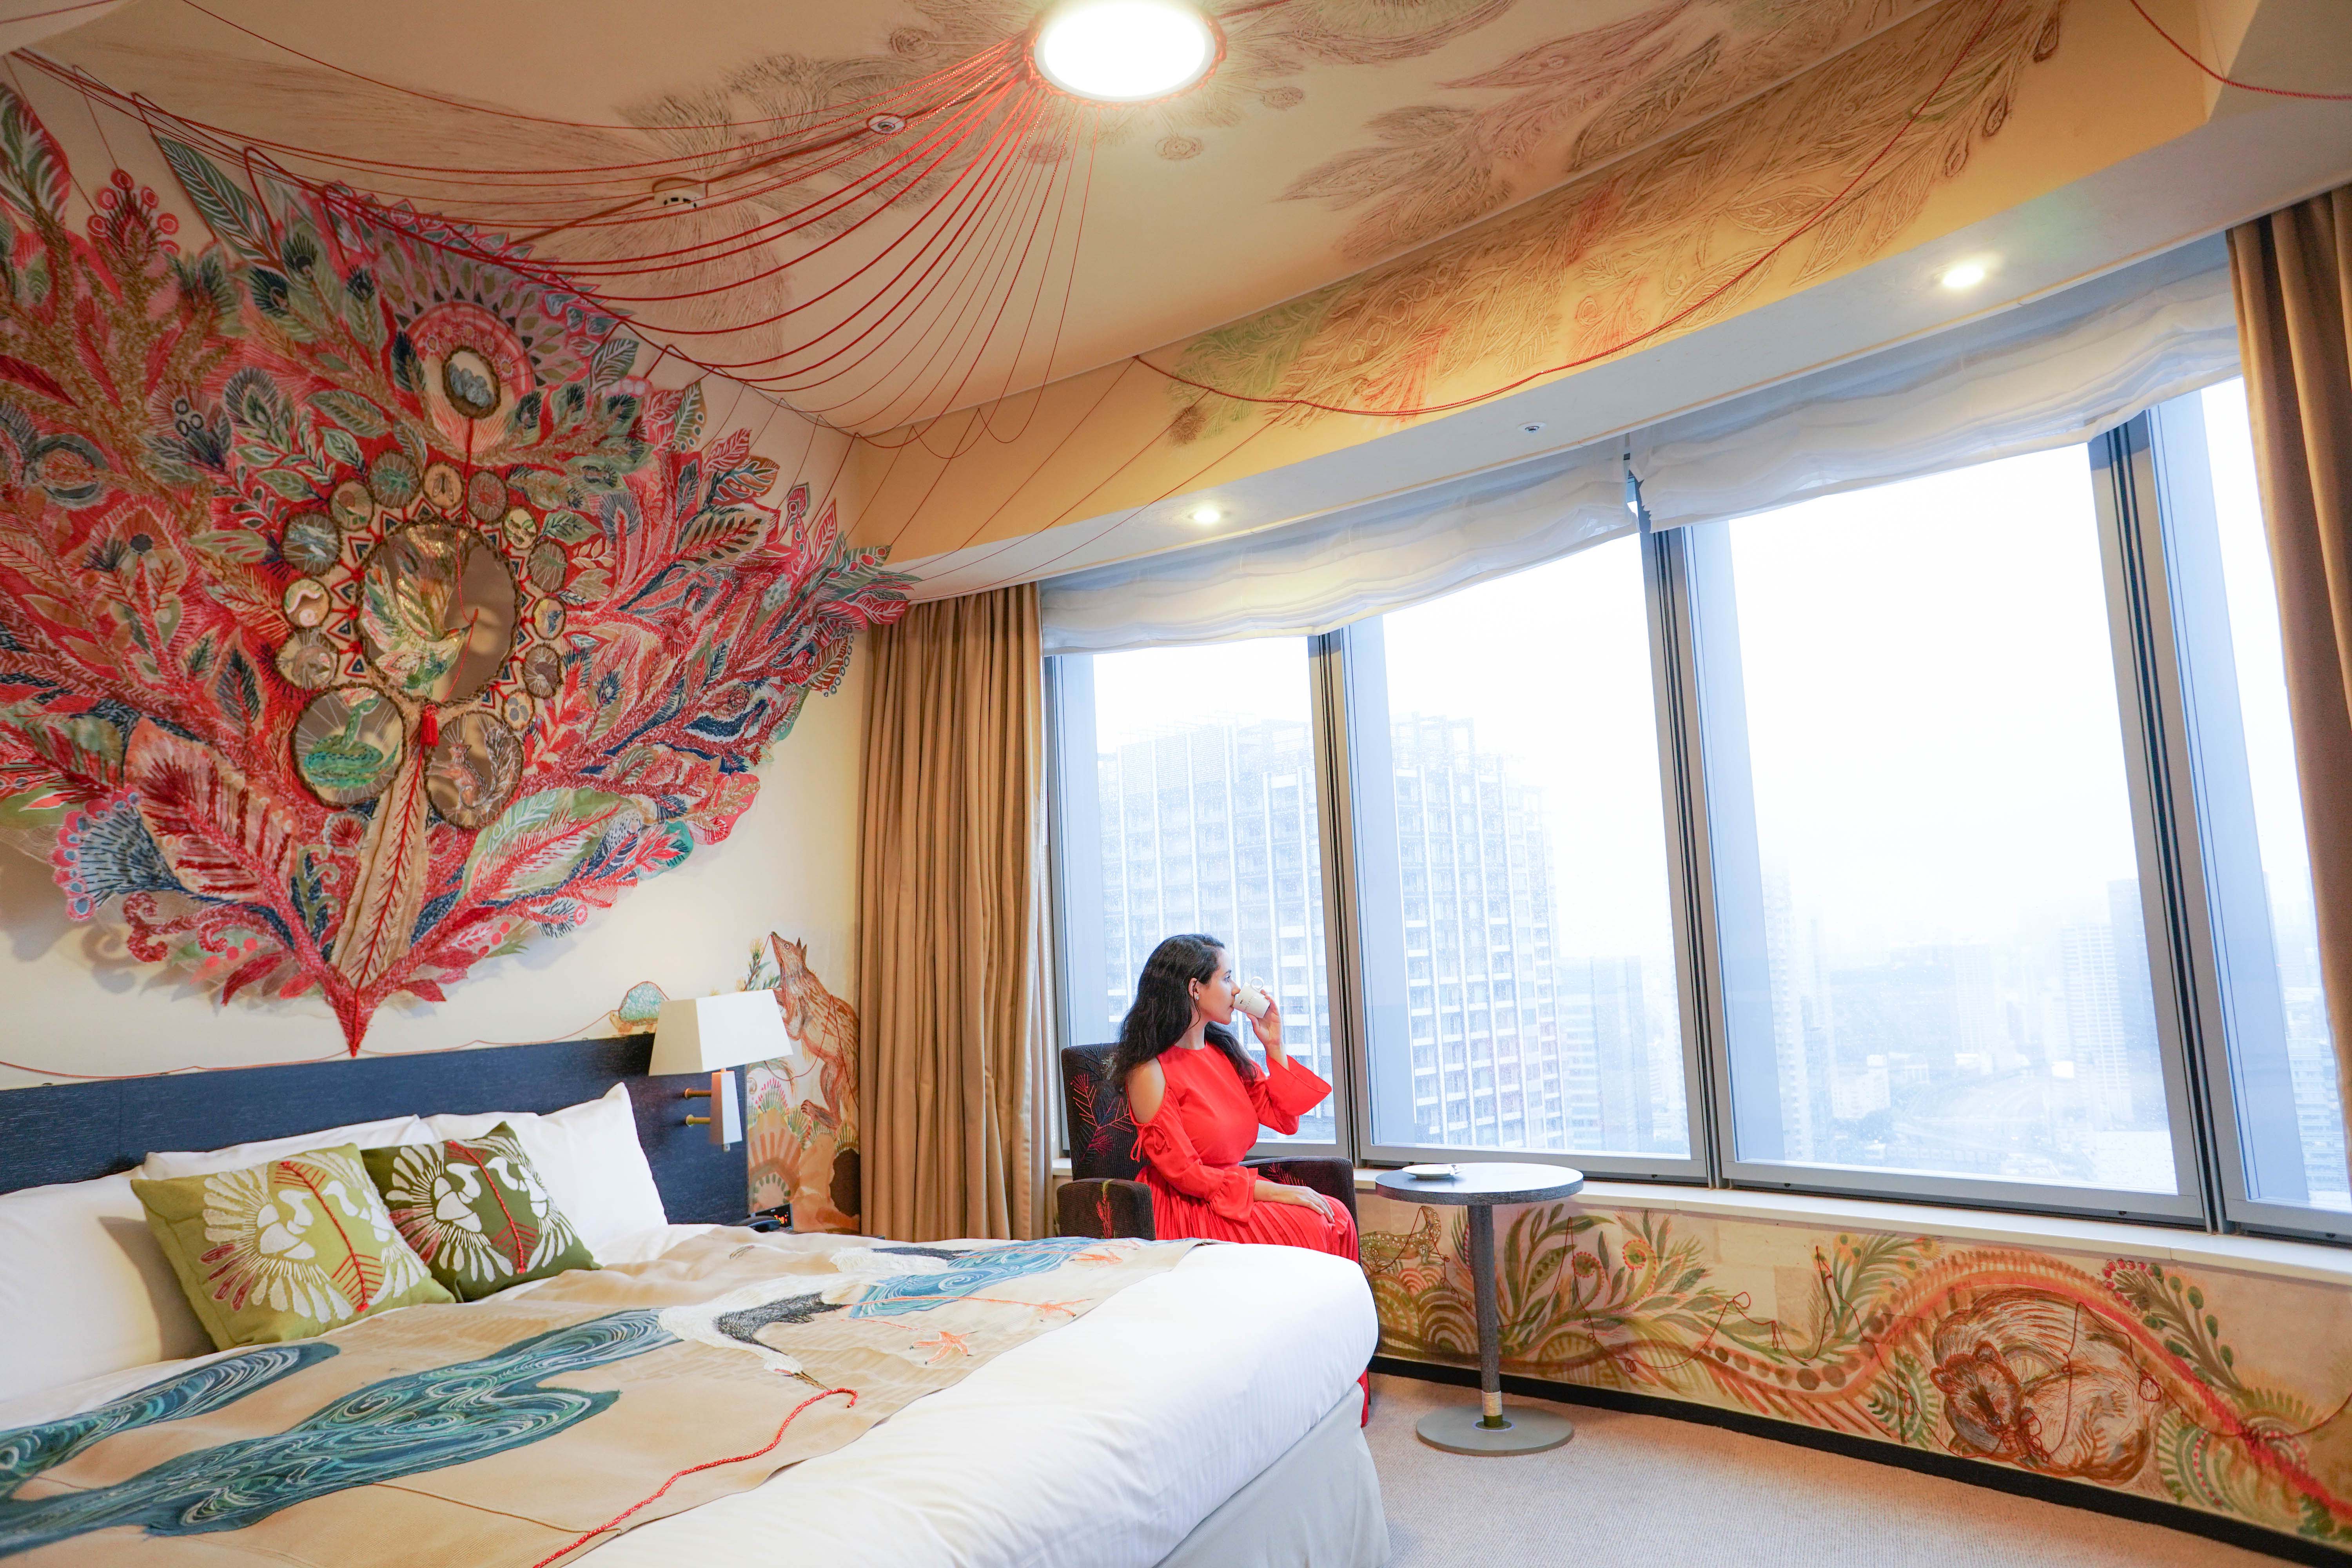 Exclusive Park Hotel Tokyo Artist Rooms Luxury Review and Tour